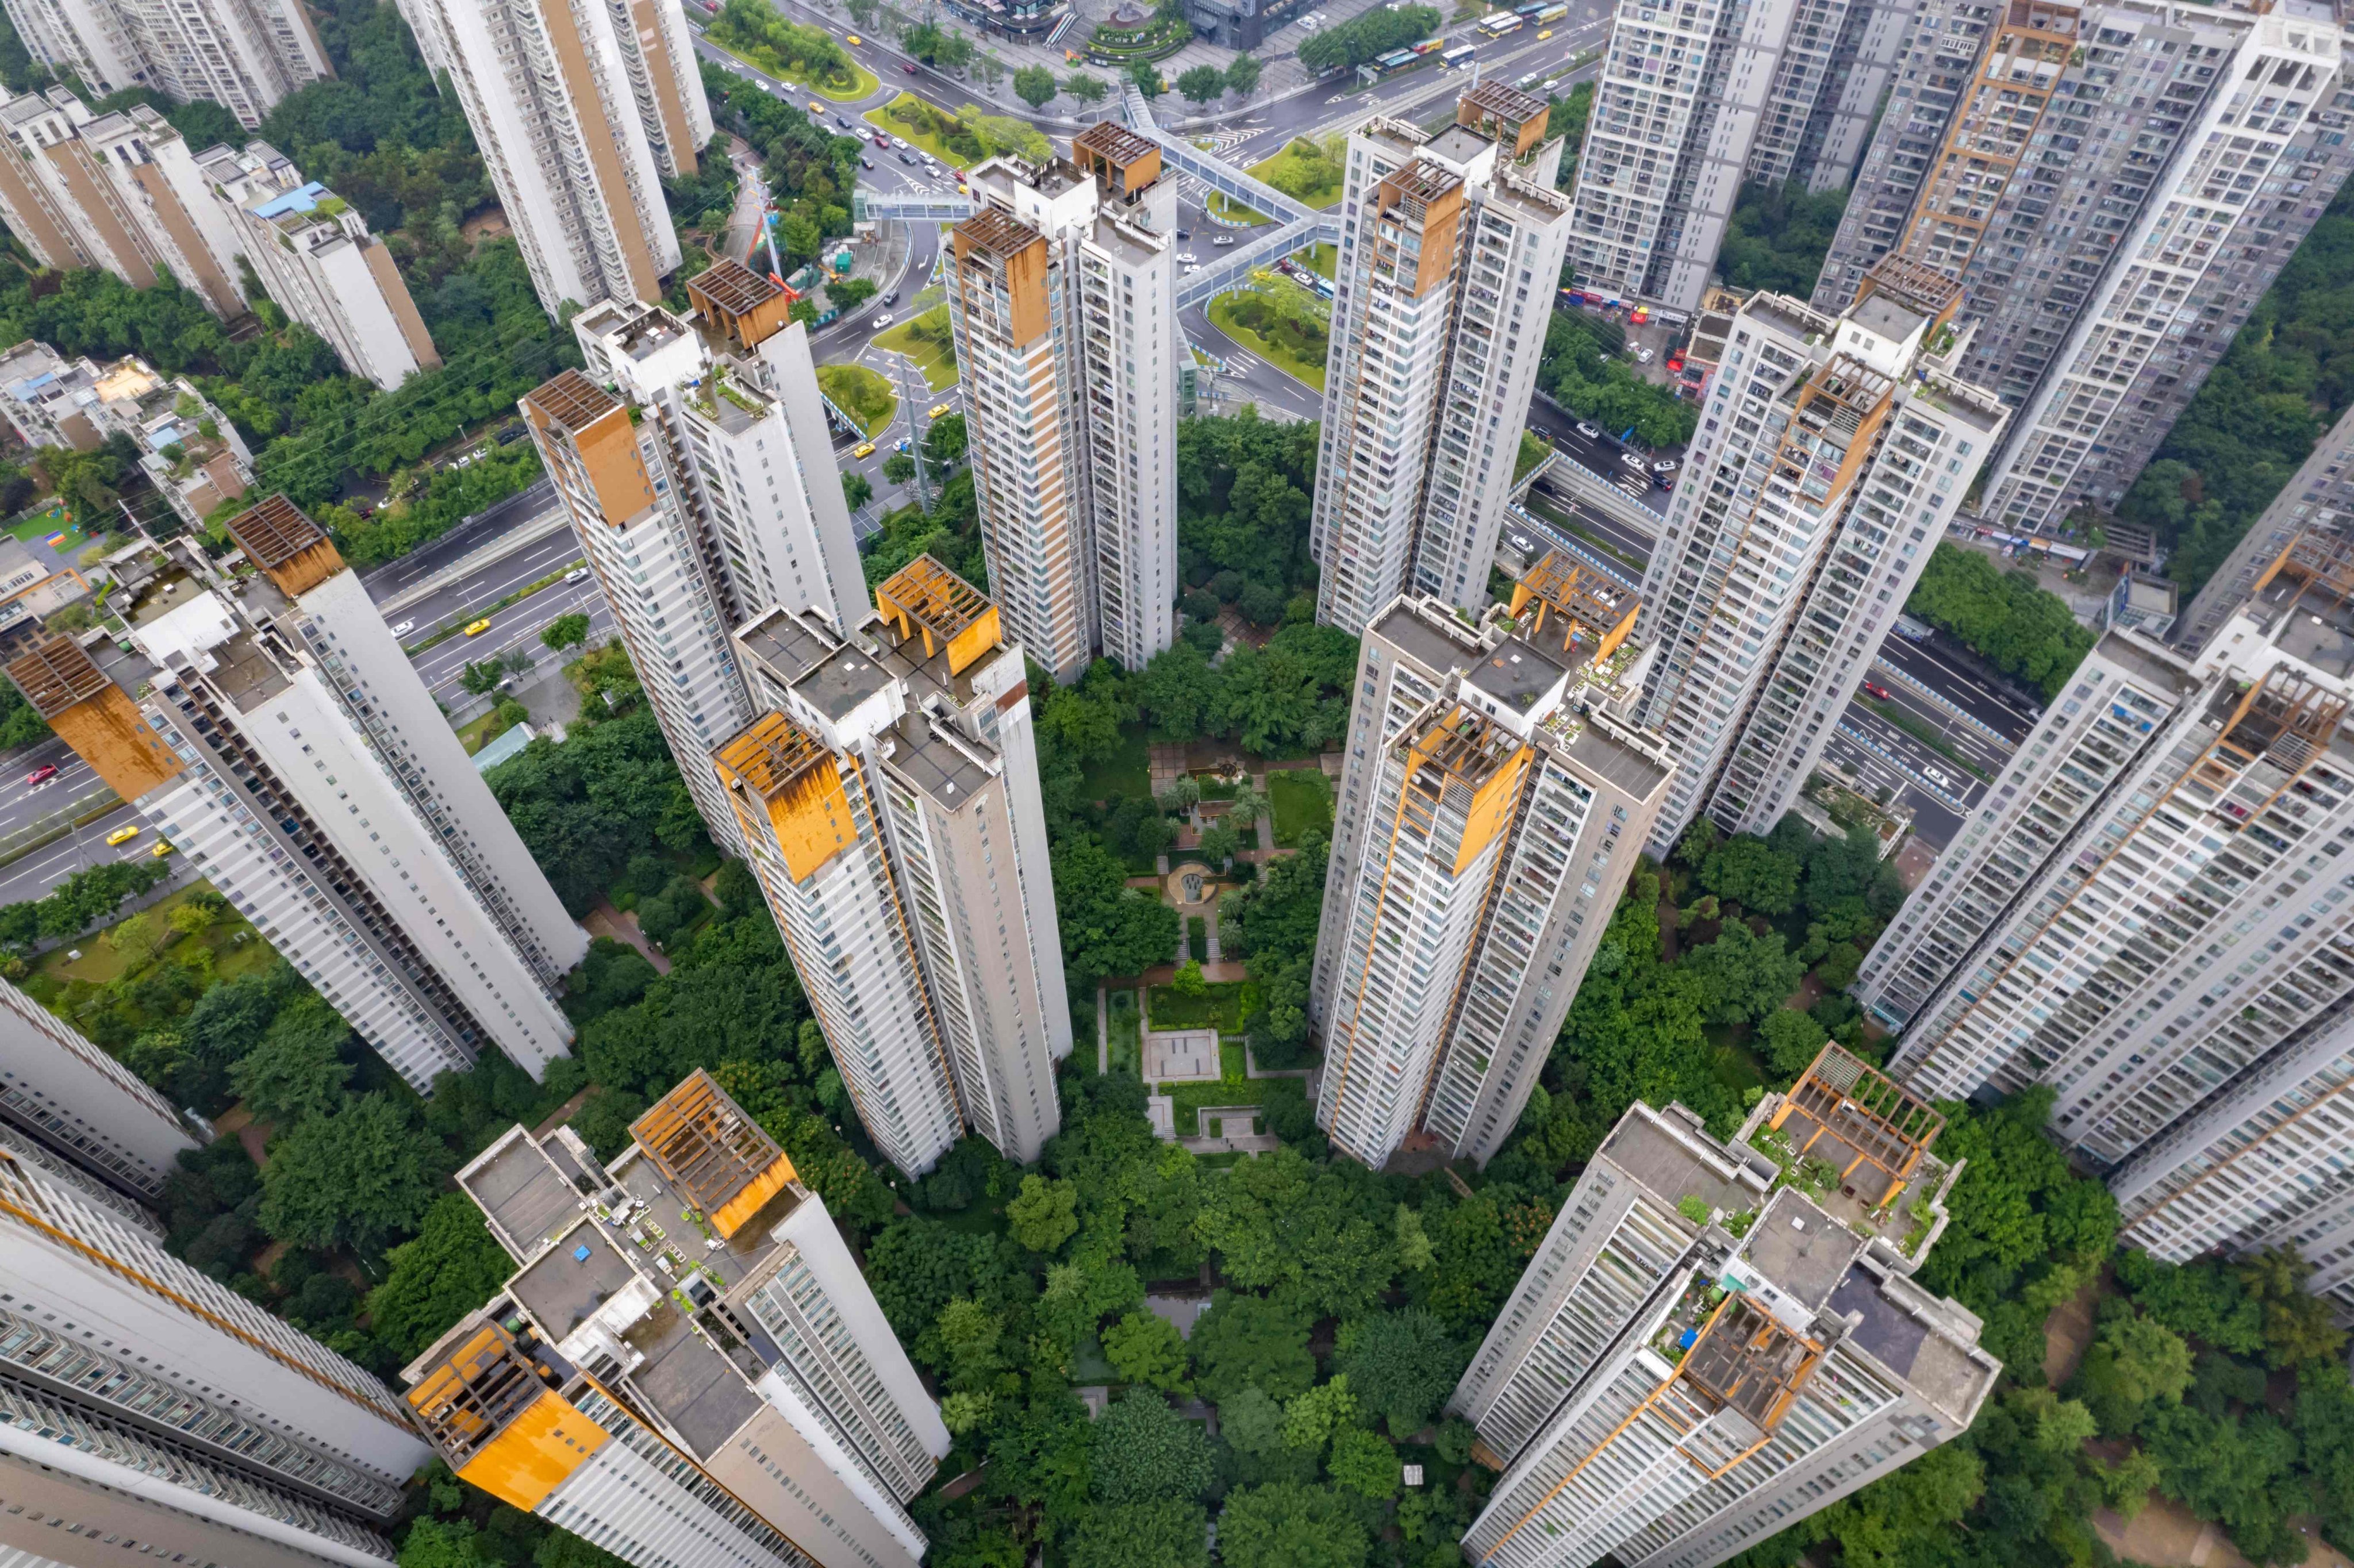 The People’s Bank of China says it will push for the development of a “new model” for the property sector. Photo: AFP